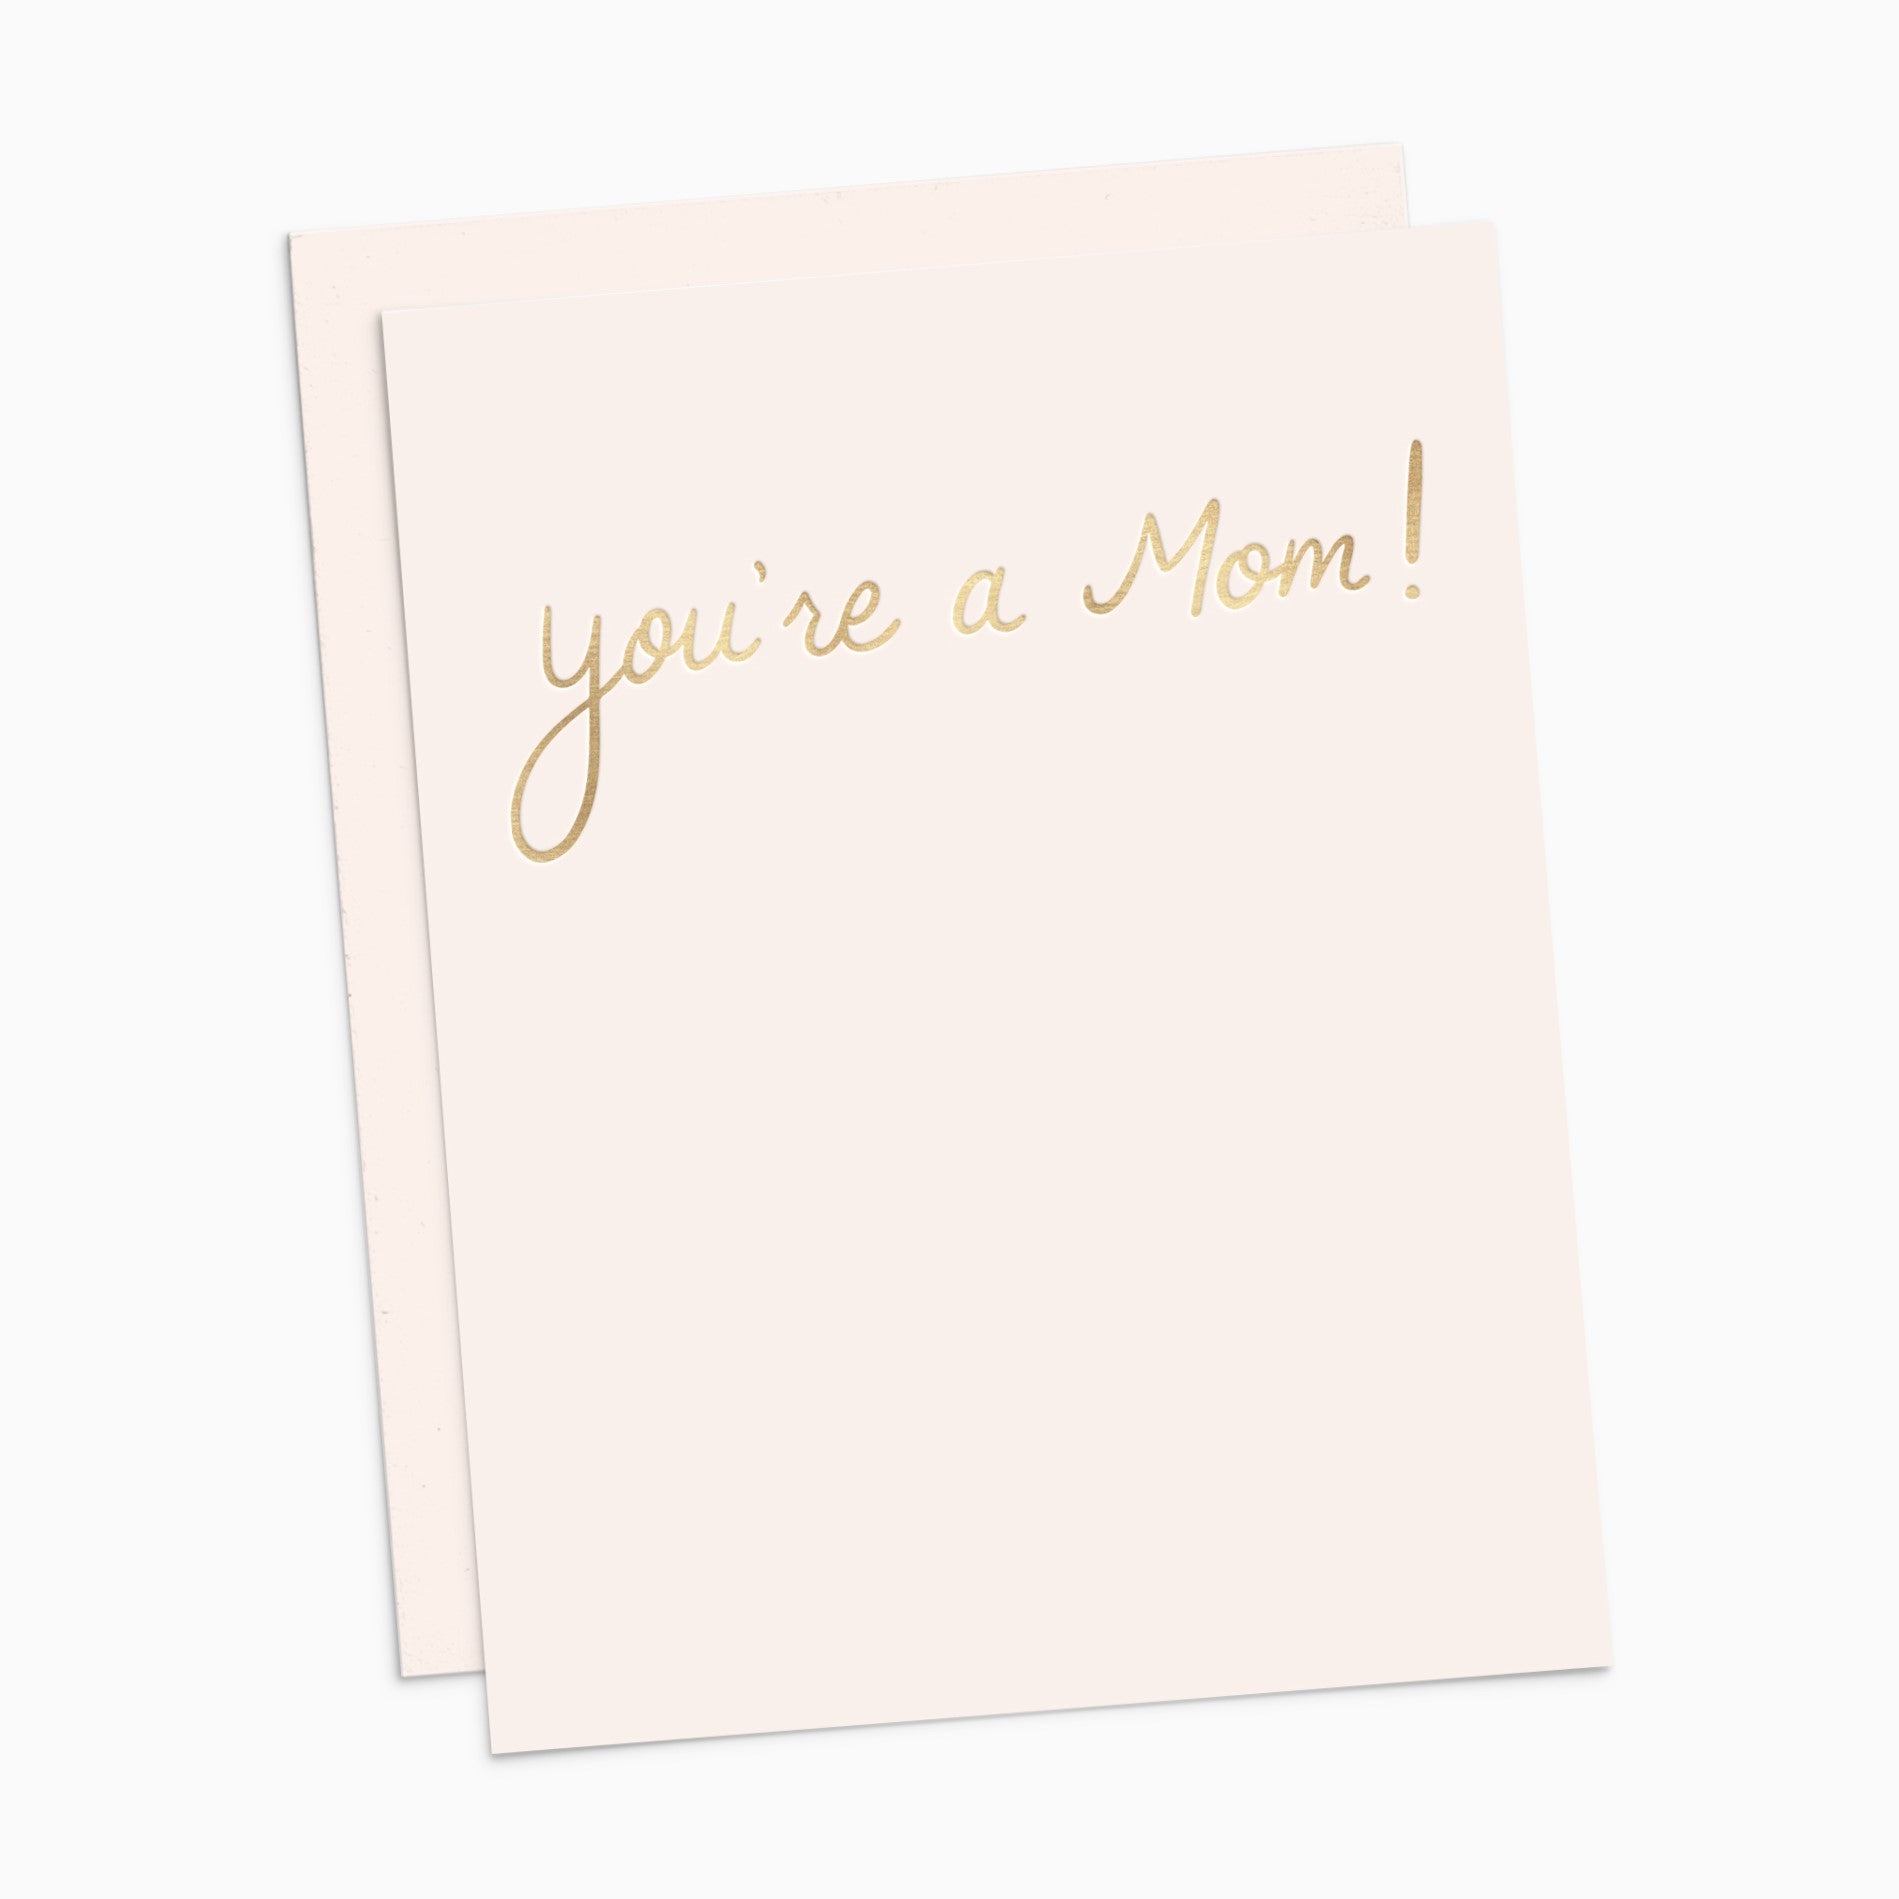 You're a Mom! Card